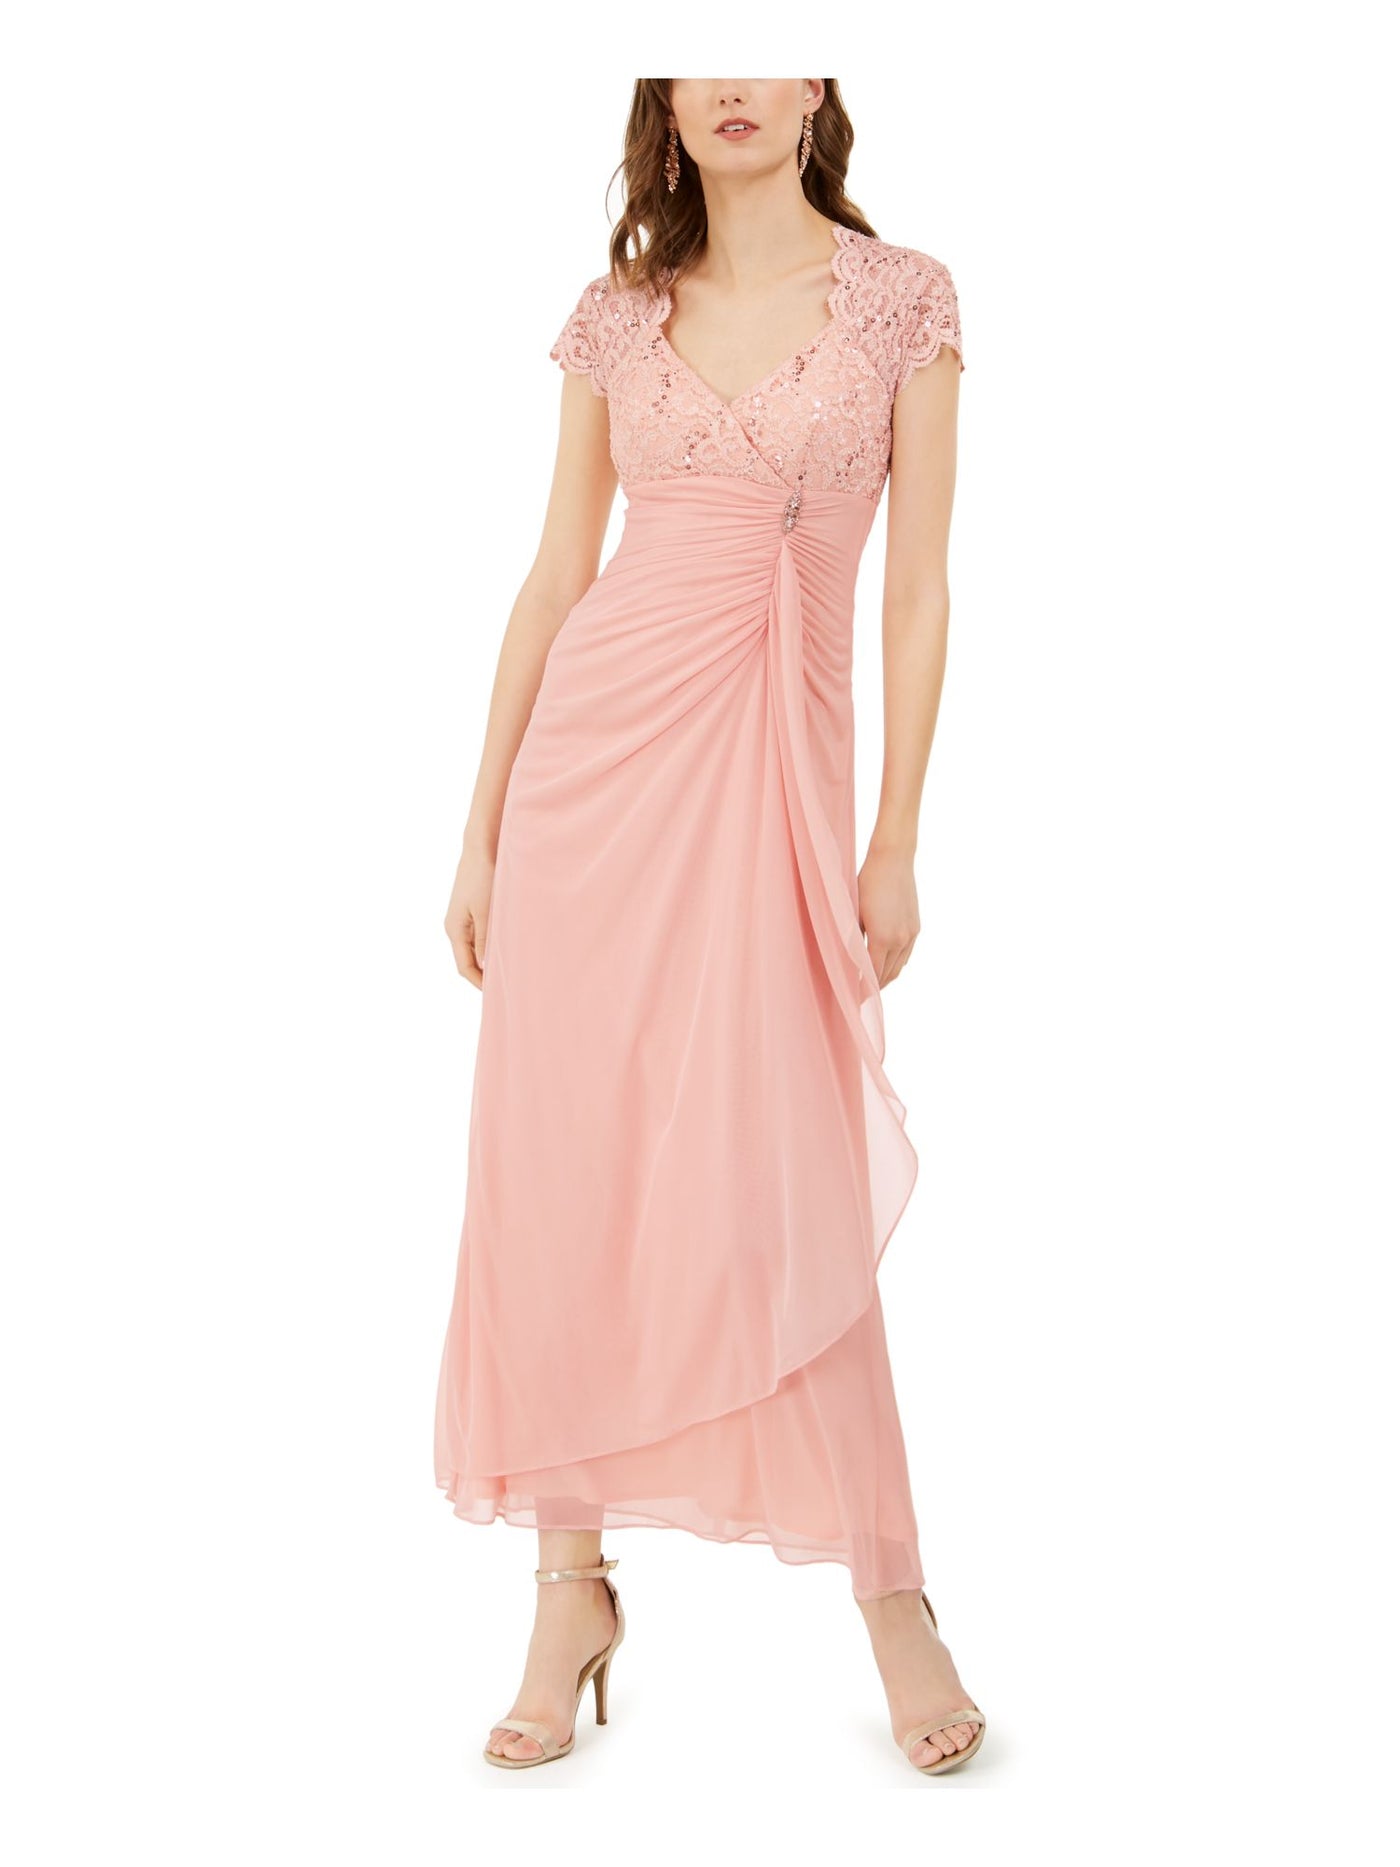 BETSY & ADAM Womens Pink Stretch Embellished Zippered Ruched Side Ruffle Open Back Short Sleeve Surplice Neckline Maxi Formal Gown Dress Petites 8P